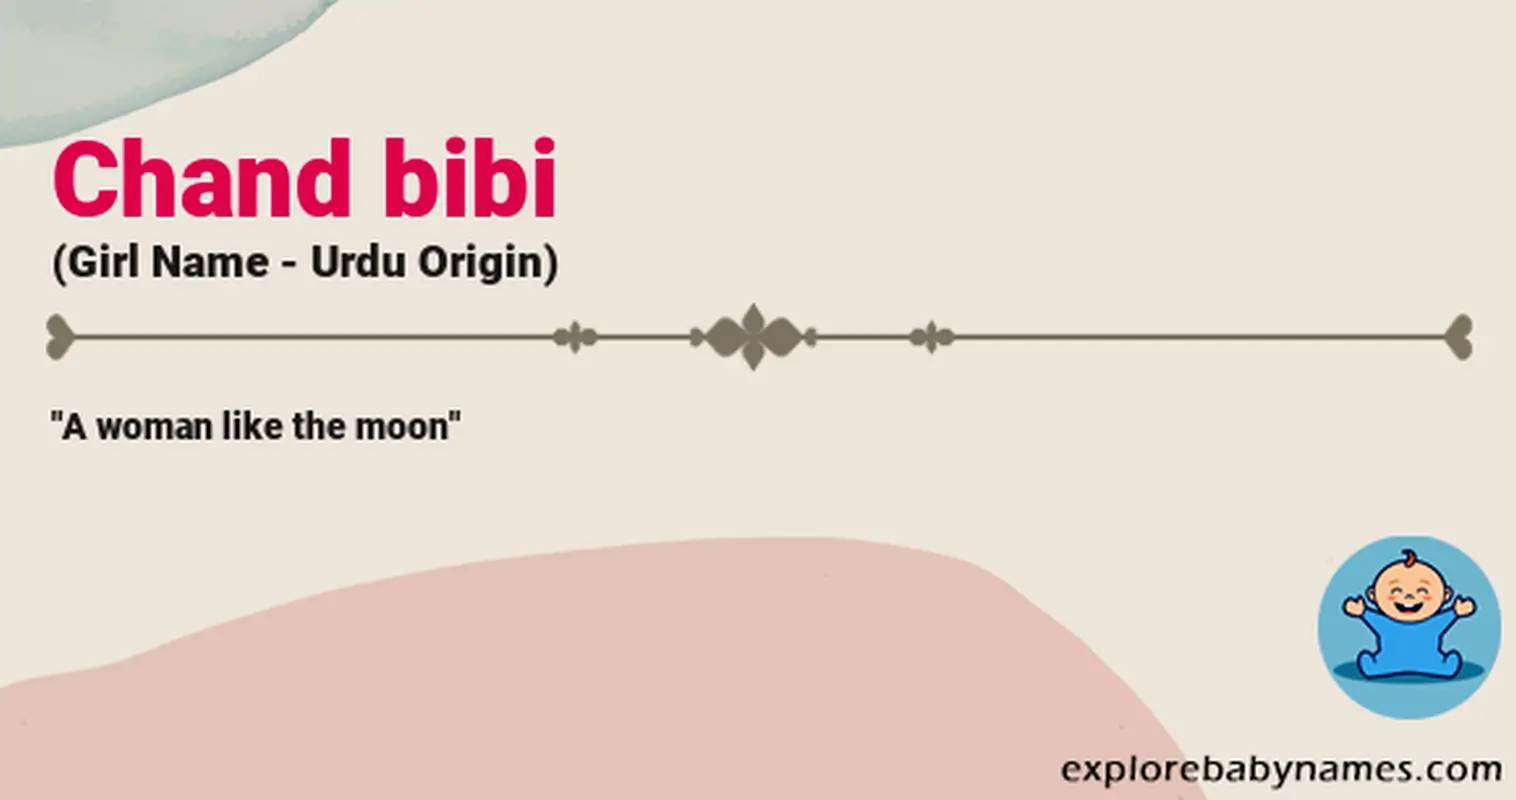 Meaning of Chand bibi